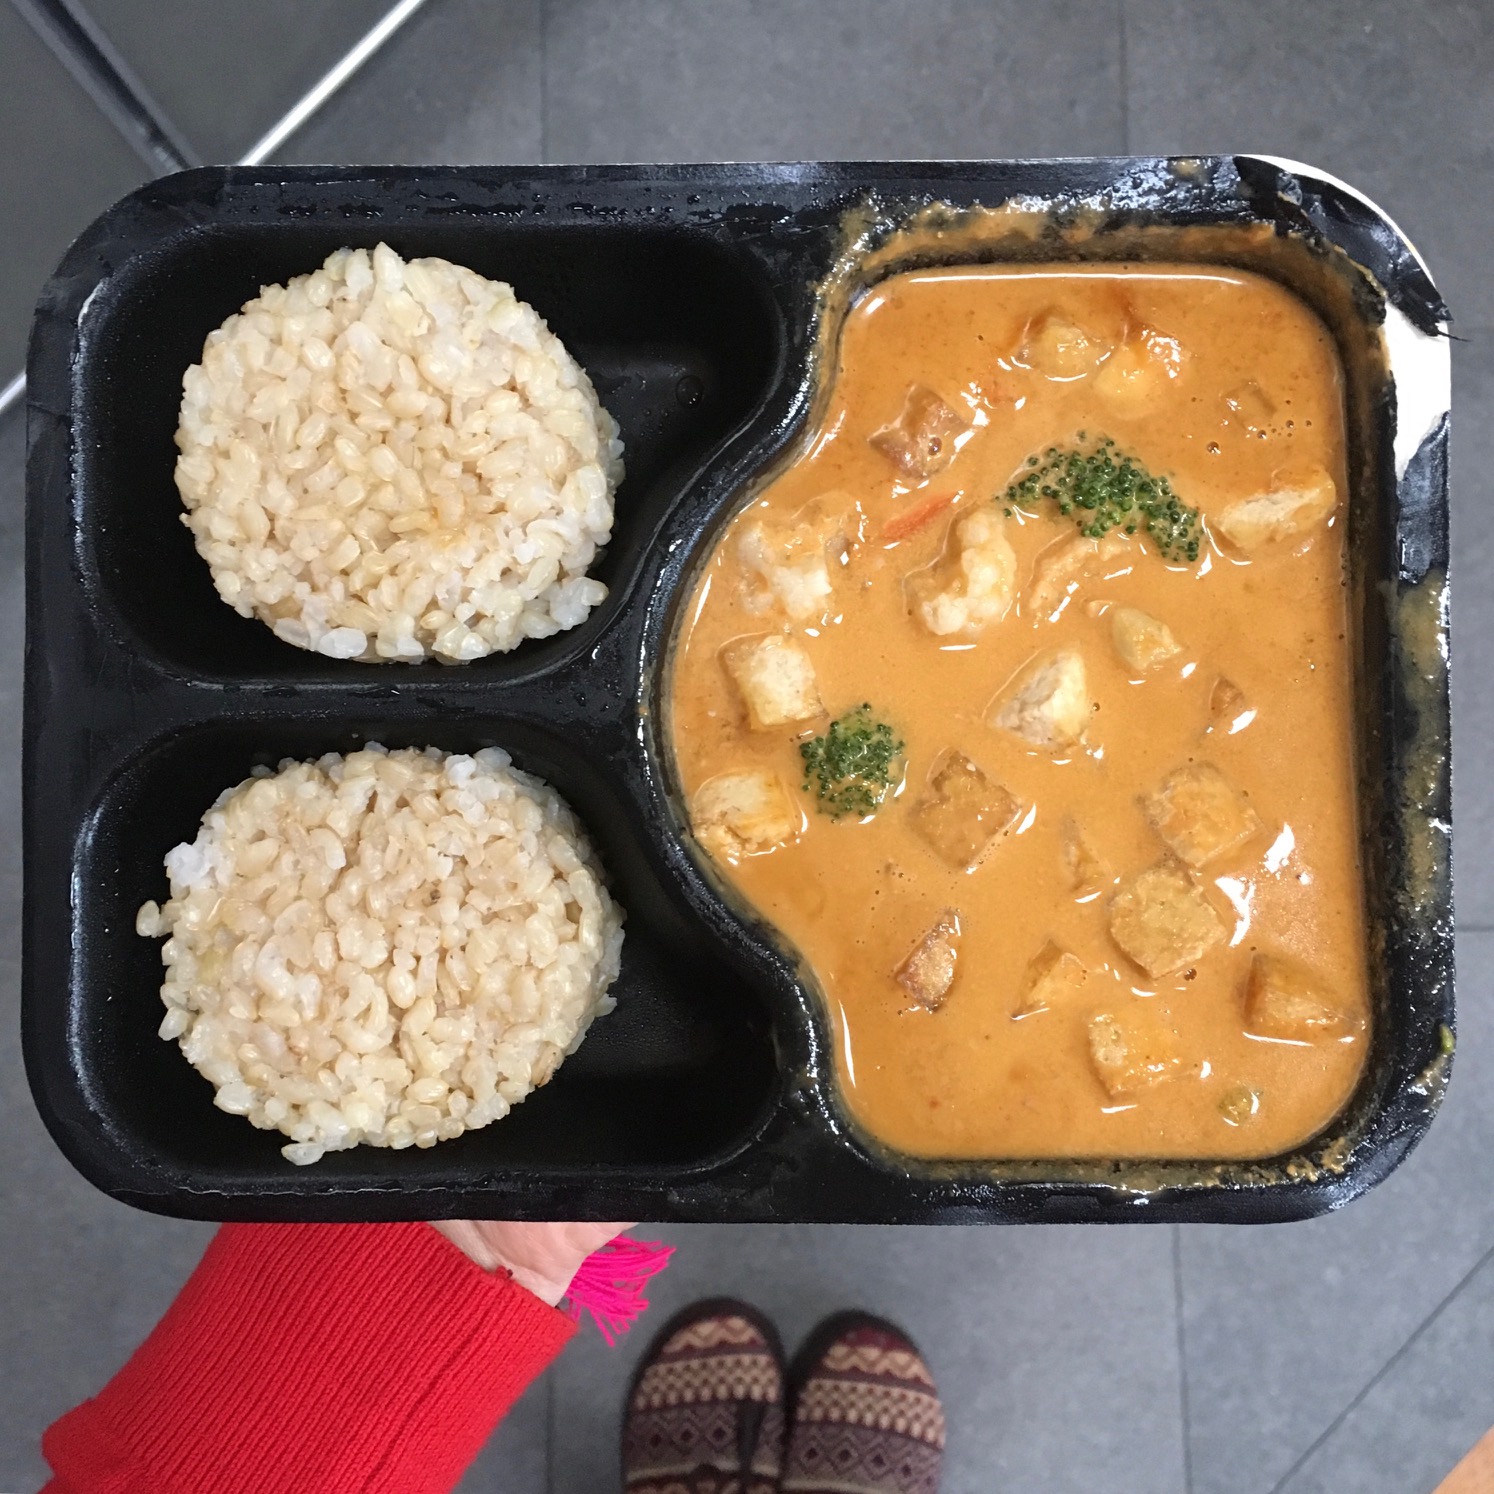 Veestro Red Curry with Tofu and Veggies